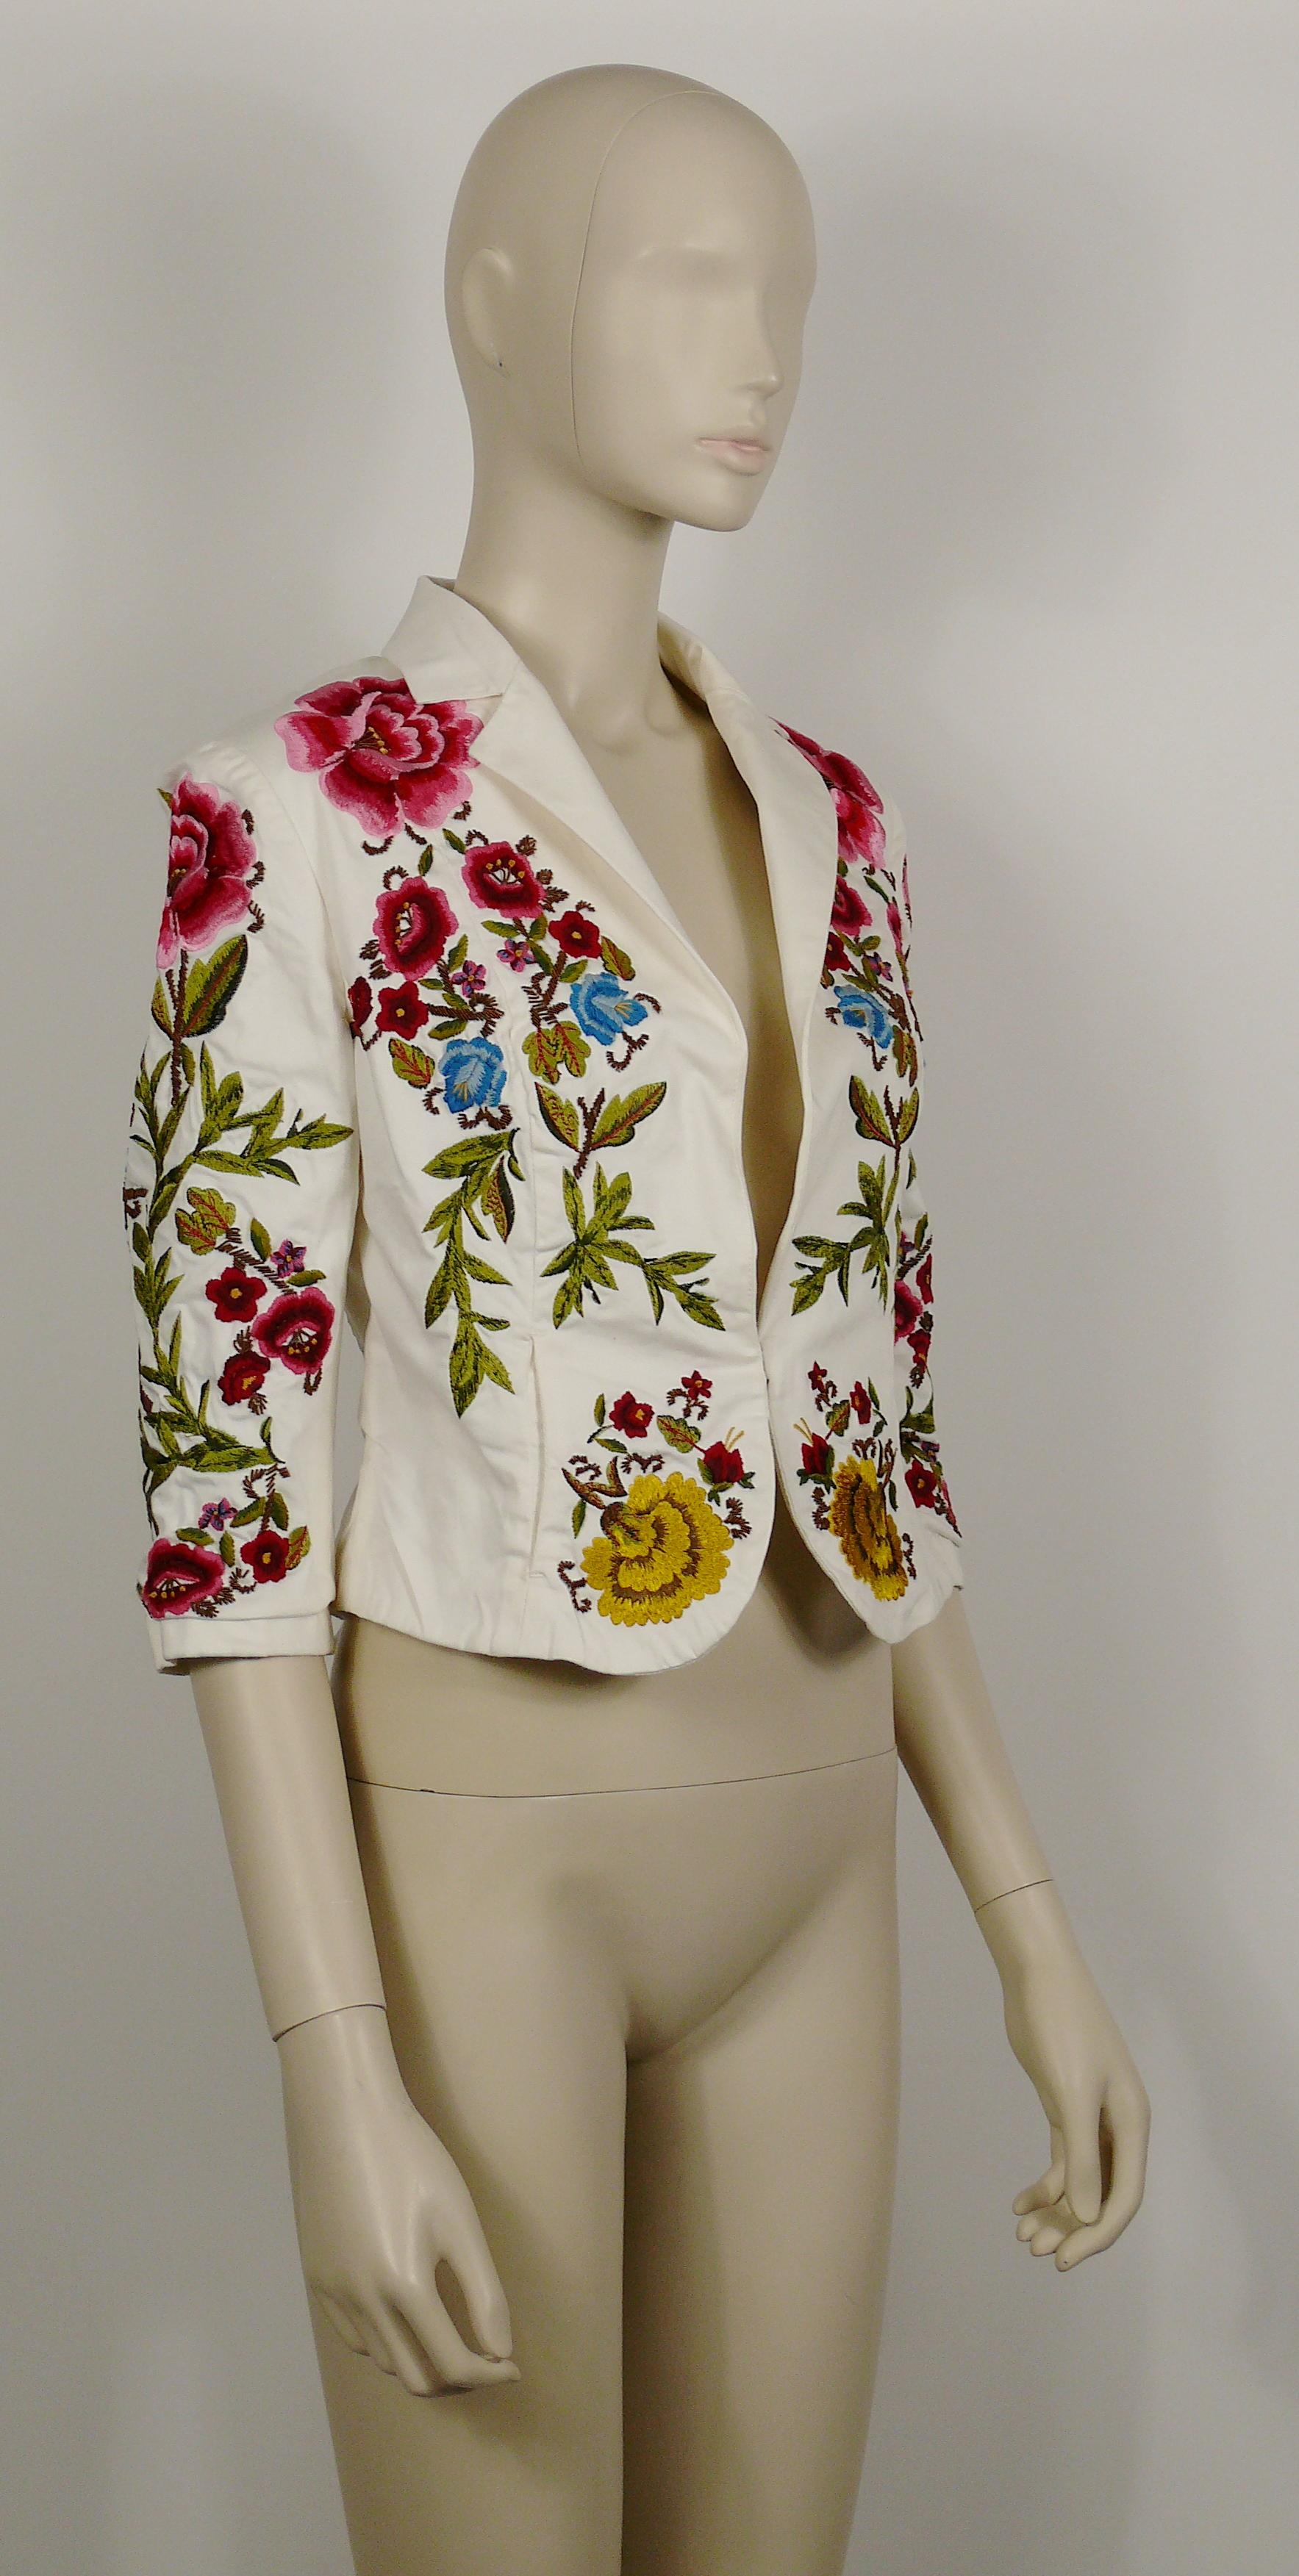 CHRISTIAN LACROIX vintage white blazer featuring a gorgeous embroidered floral design.

This blazer features :
- Cropped length.
- Notched lapels.
- Gorgeous multicolored embroidered floral design.
- Three-quarter length sleeves.
- Two side